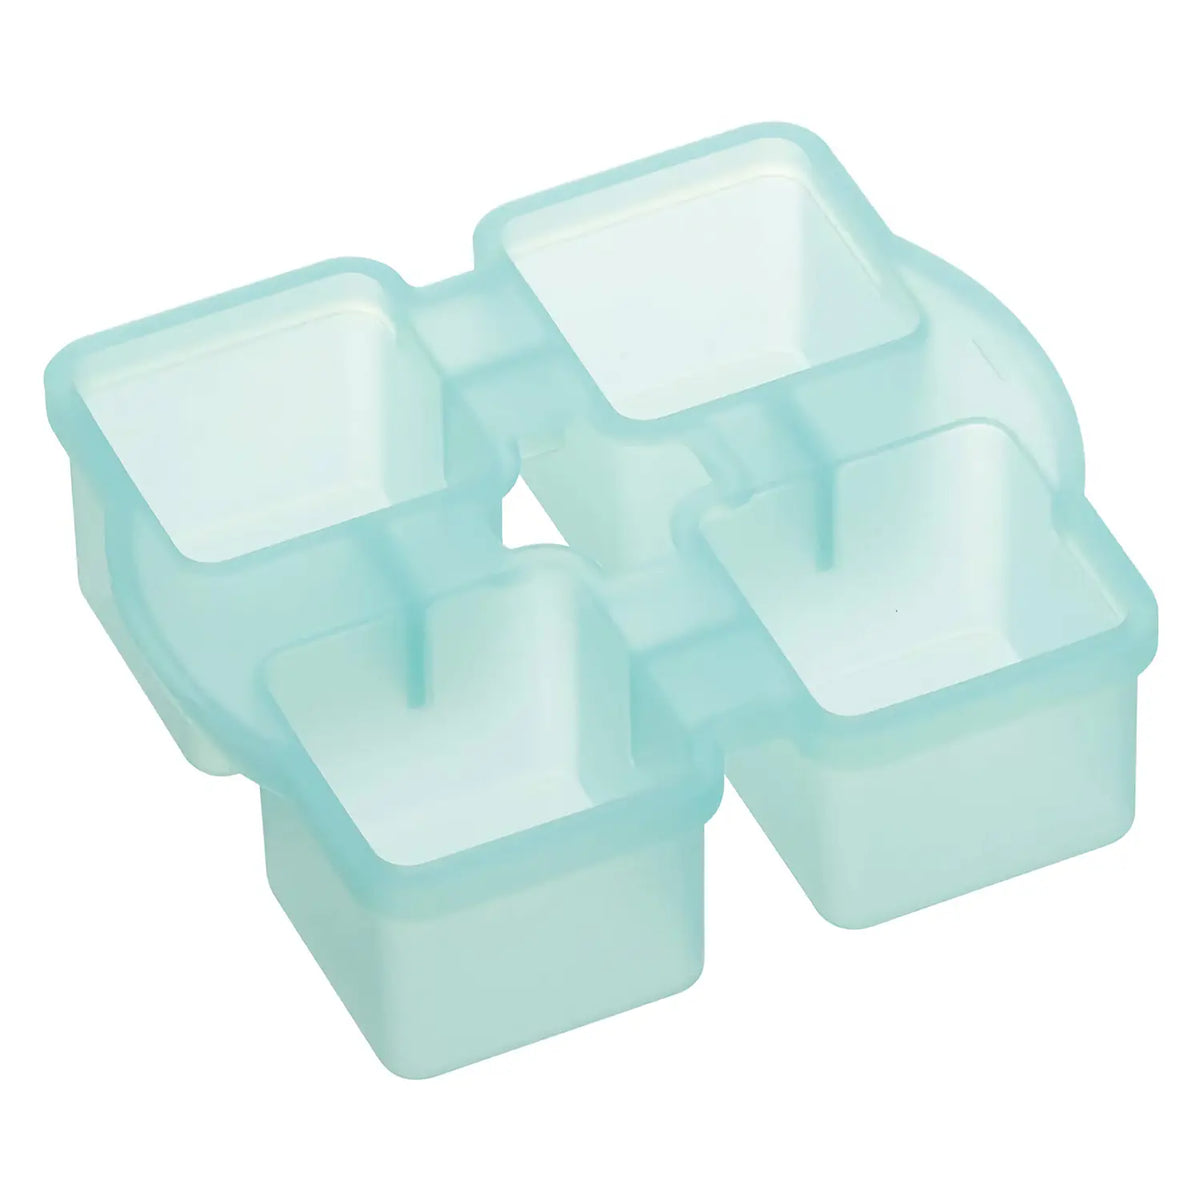 Skater Silicone Ice Tray Square Blue